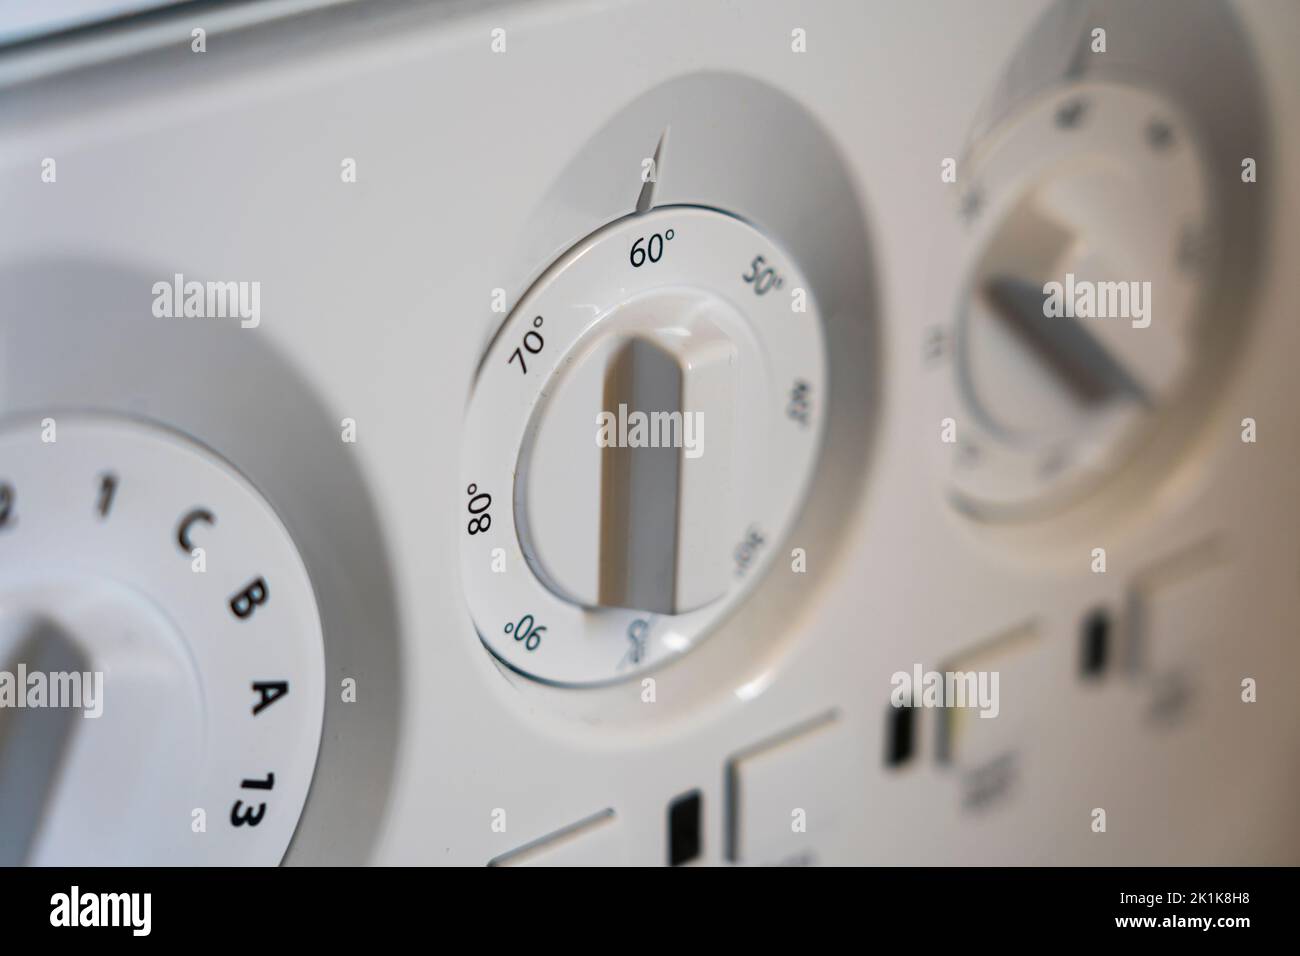 Close up of a washing machine buttons and dials. Concept - do the laundry, energy saving, electricity price, peak demand, energy efficiency Stock Photo